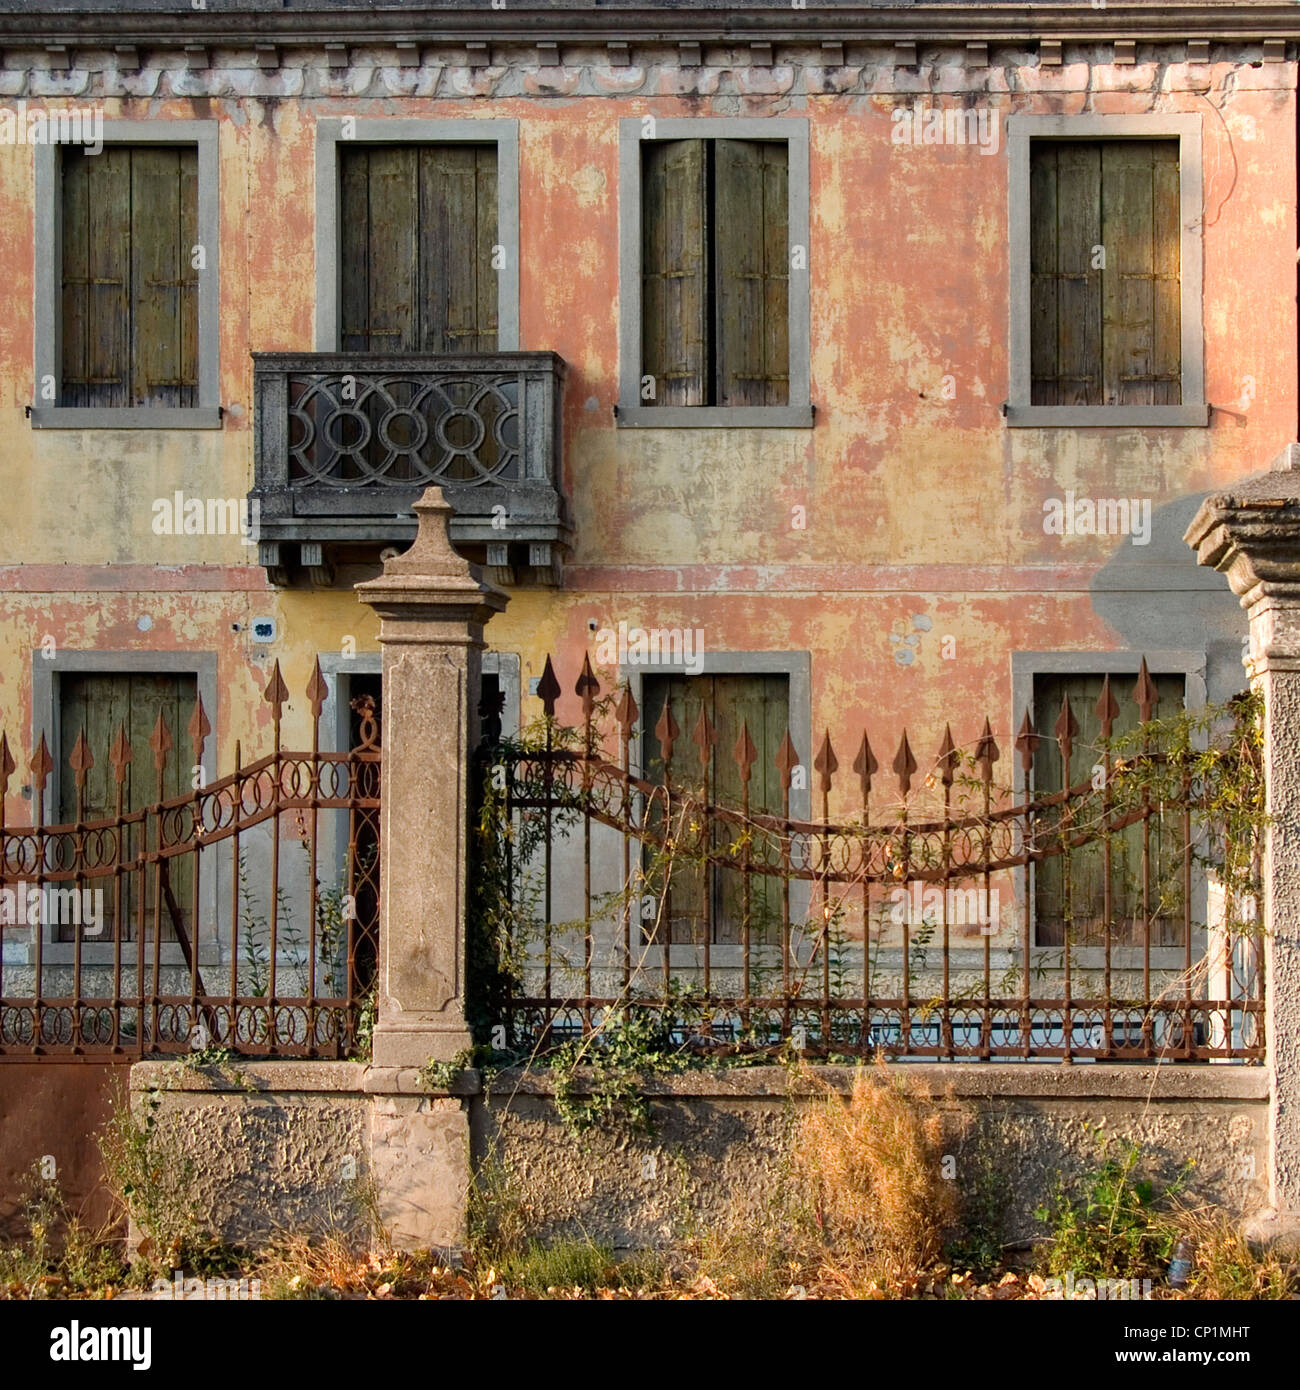 Abandoned building in Venice, Italy. Stock Photo